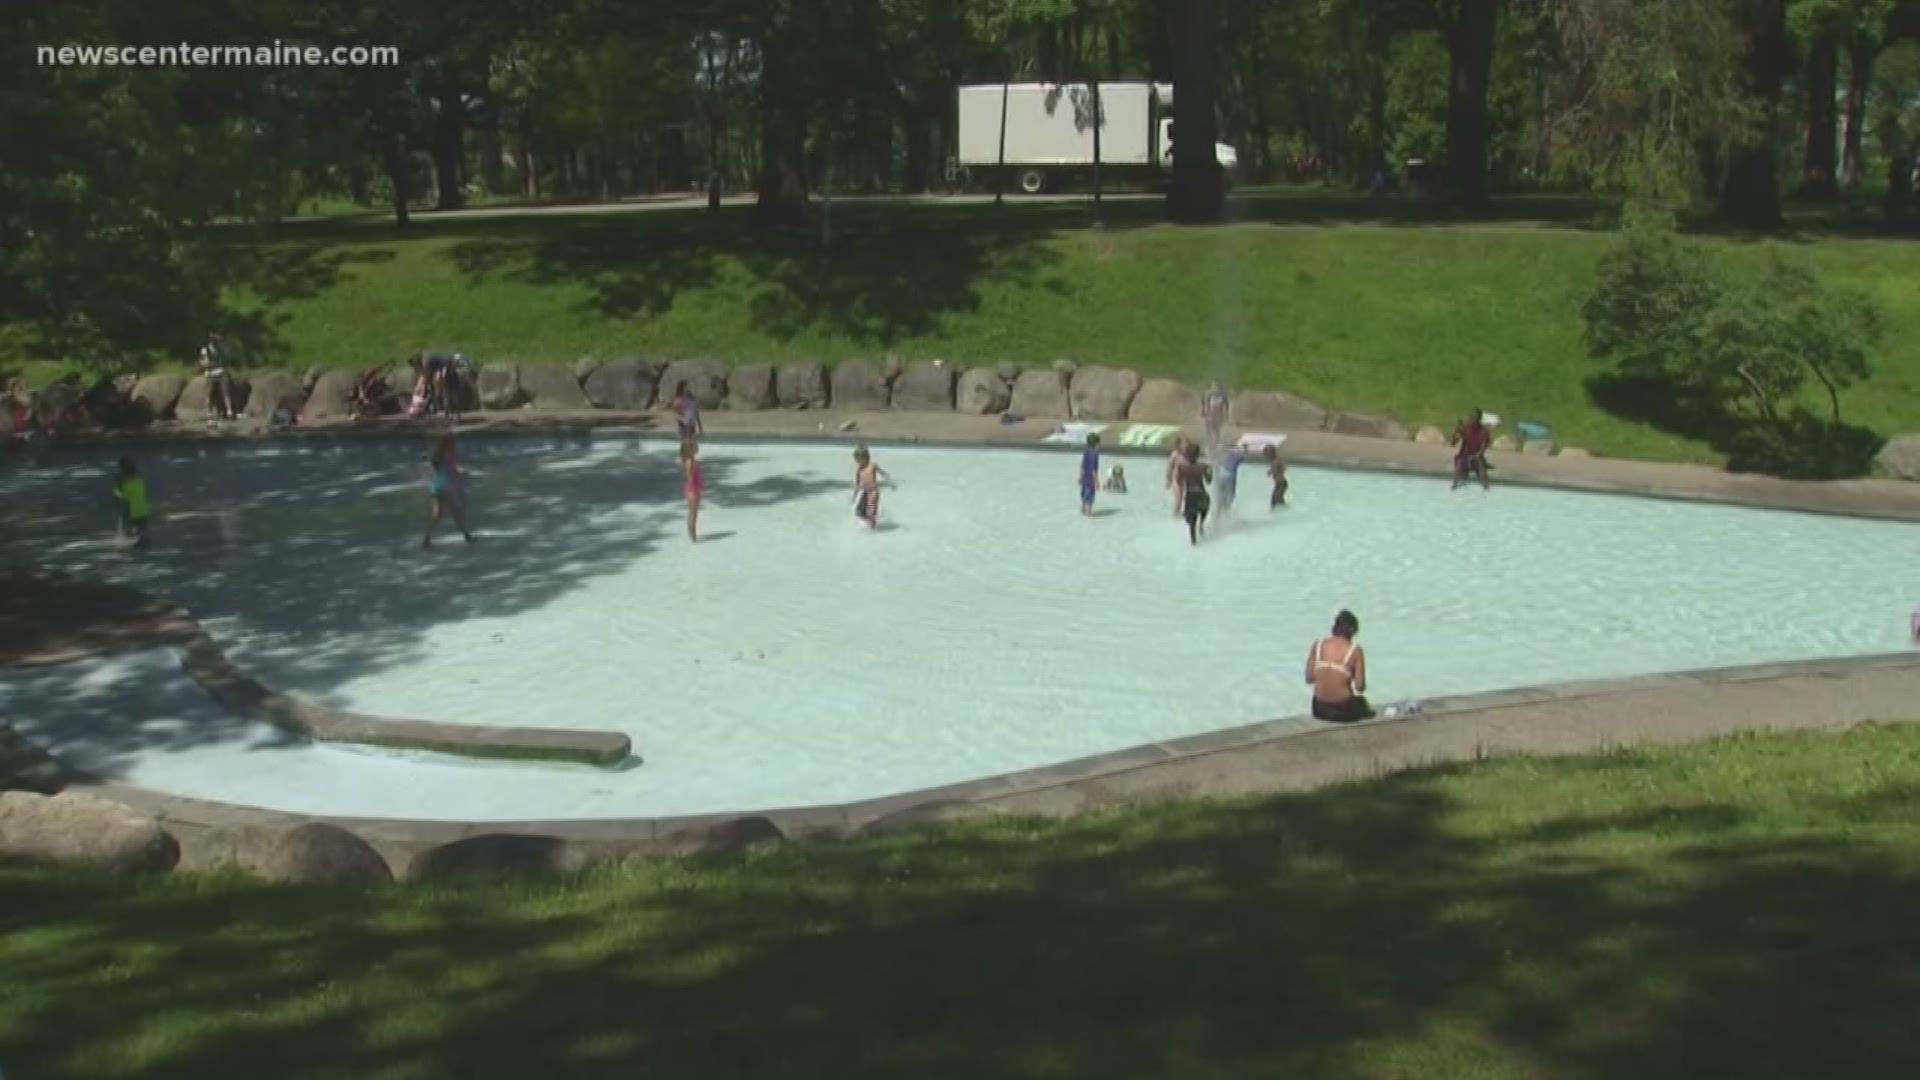 The best ways to combat the heat this weekend are shade, fluids, and bodies of water.